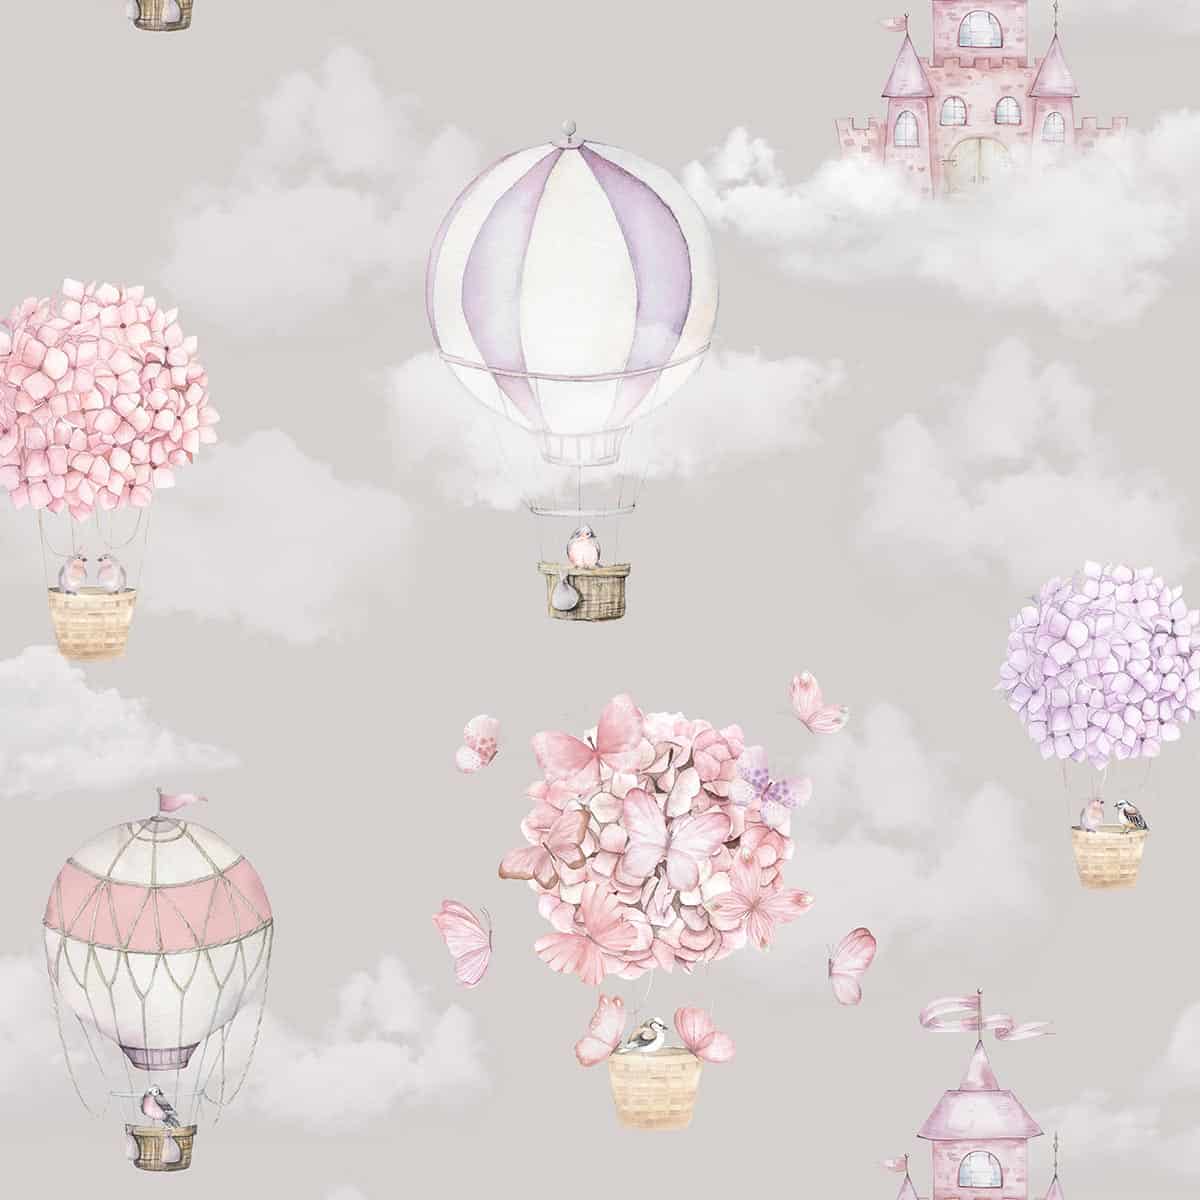 Balloons of Blooms, Adorable Hot Air Balloon Wallpaper for Girls Room, Beige